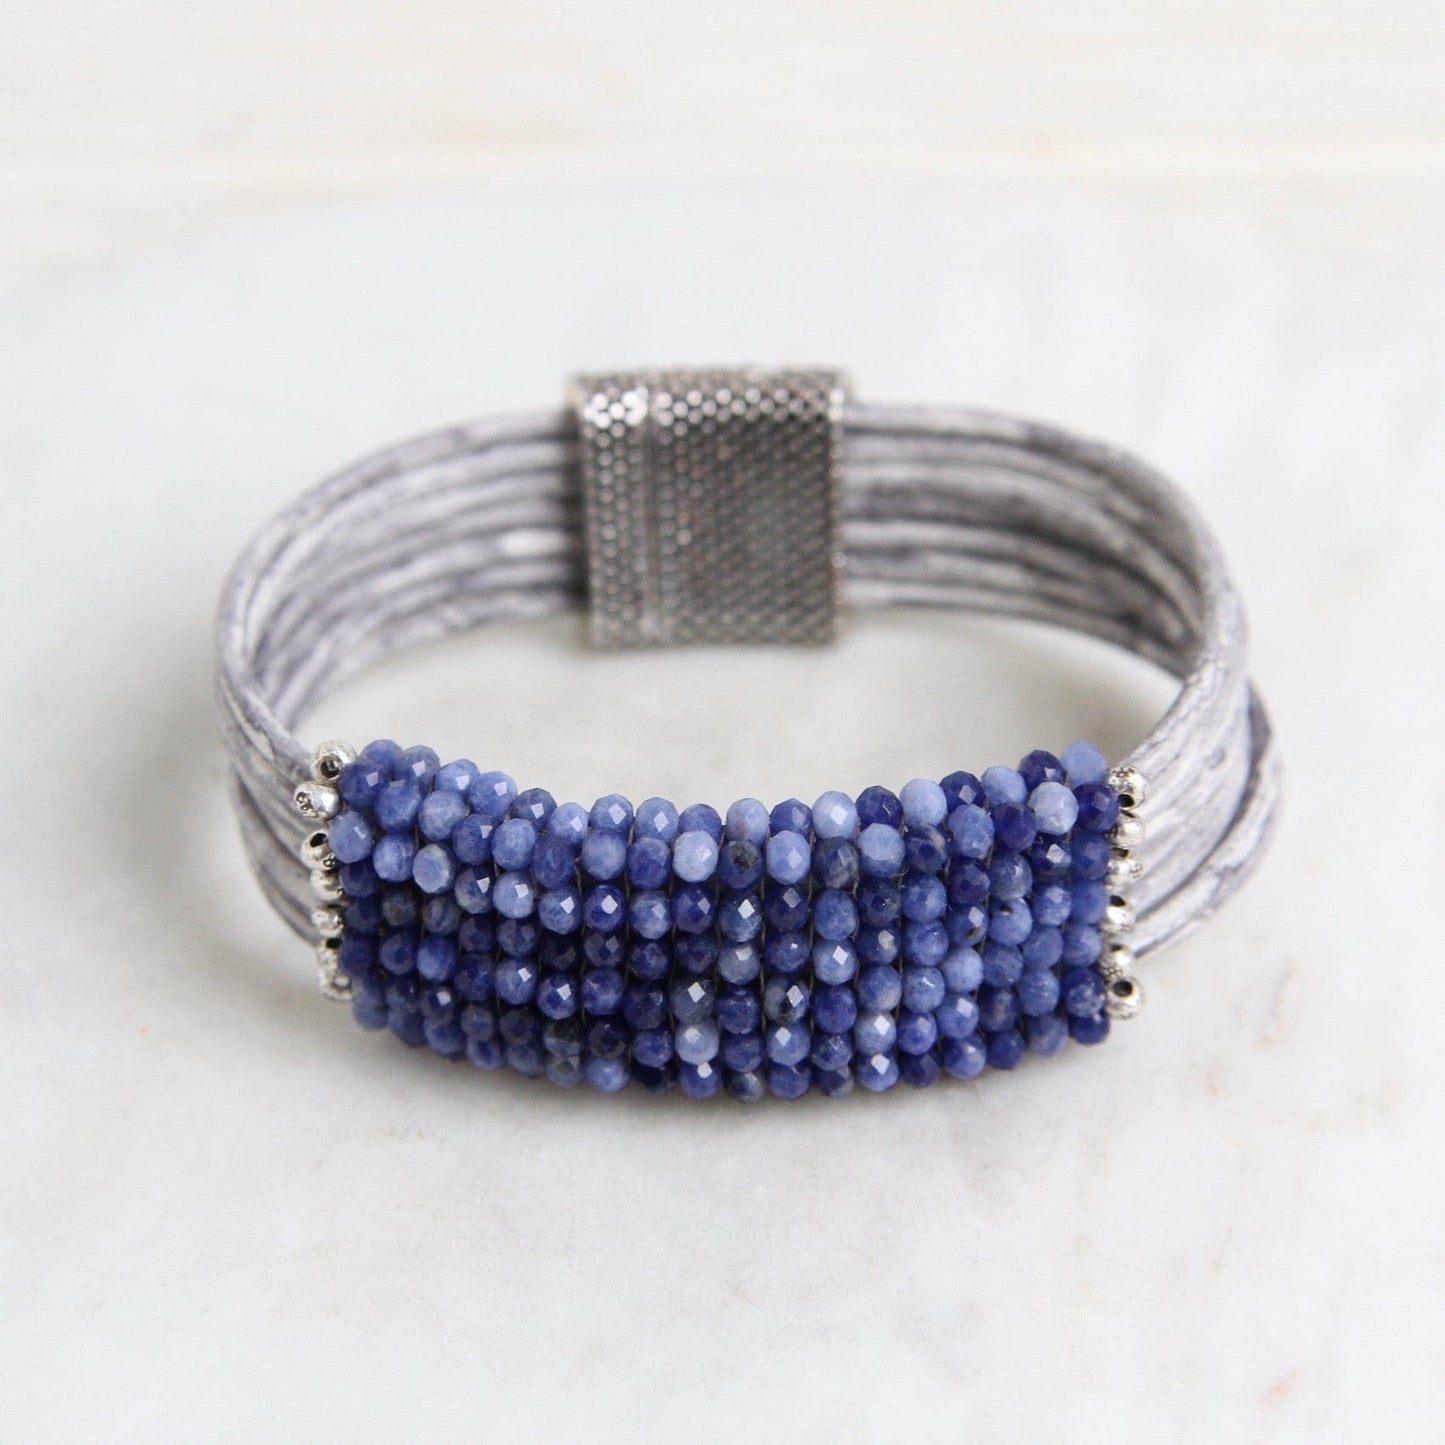 BRC-JM Hand Stitched Shaded Sodalite with Hill Tribe Stamped Fine Silver Bead Trim Bracelet